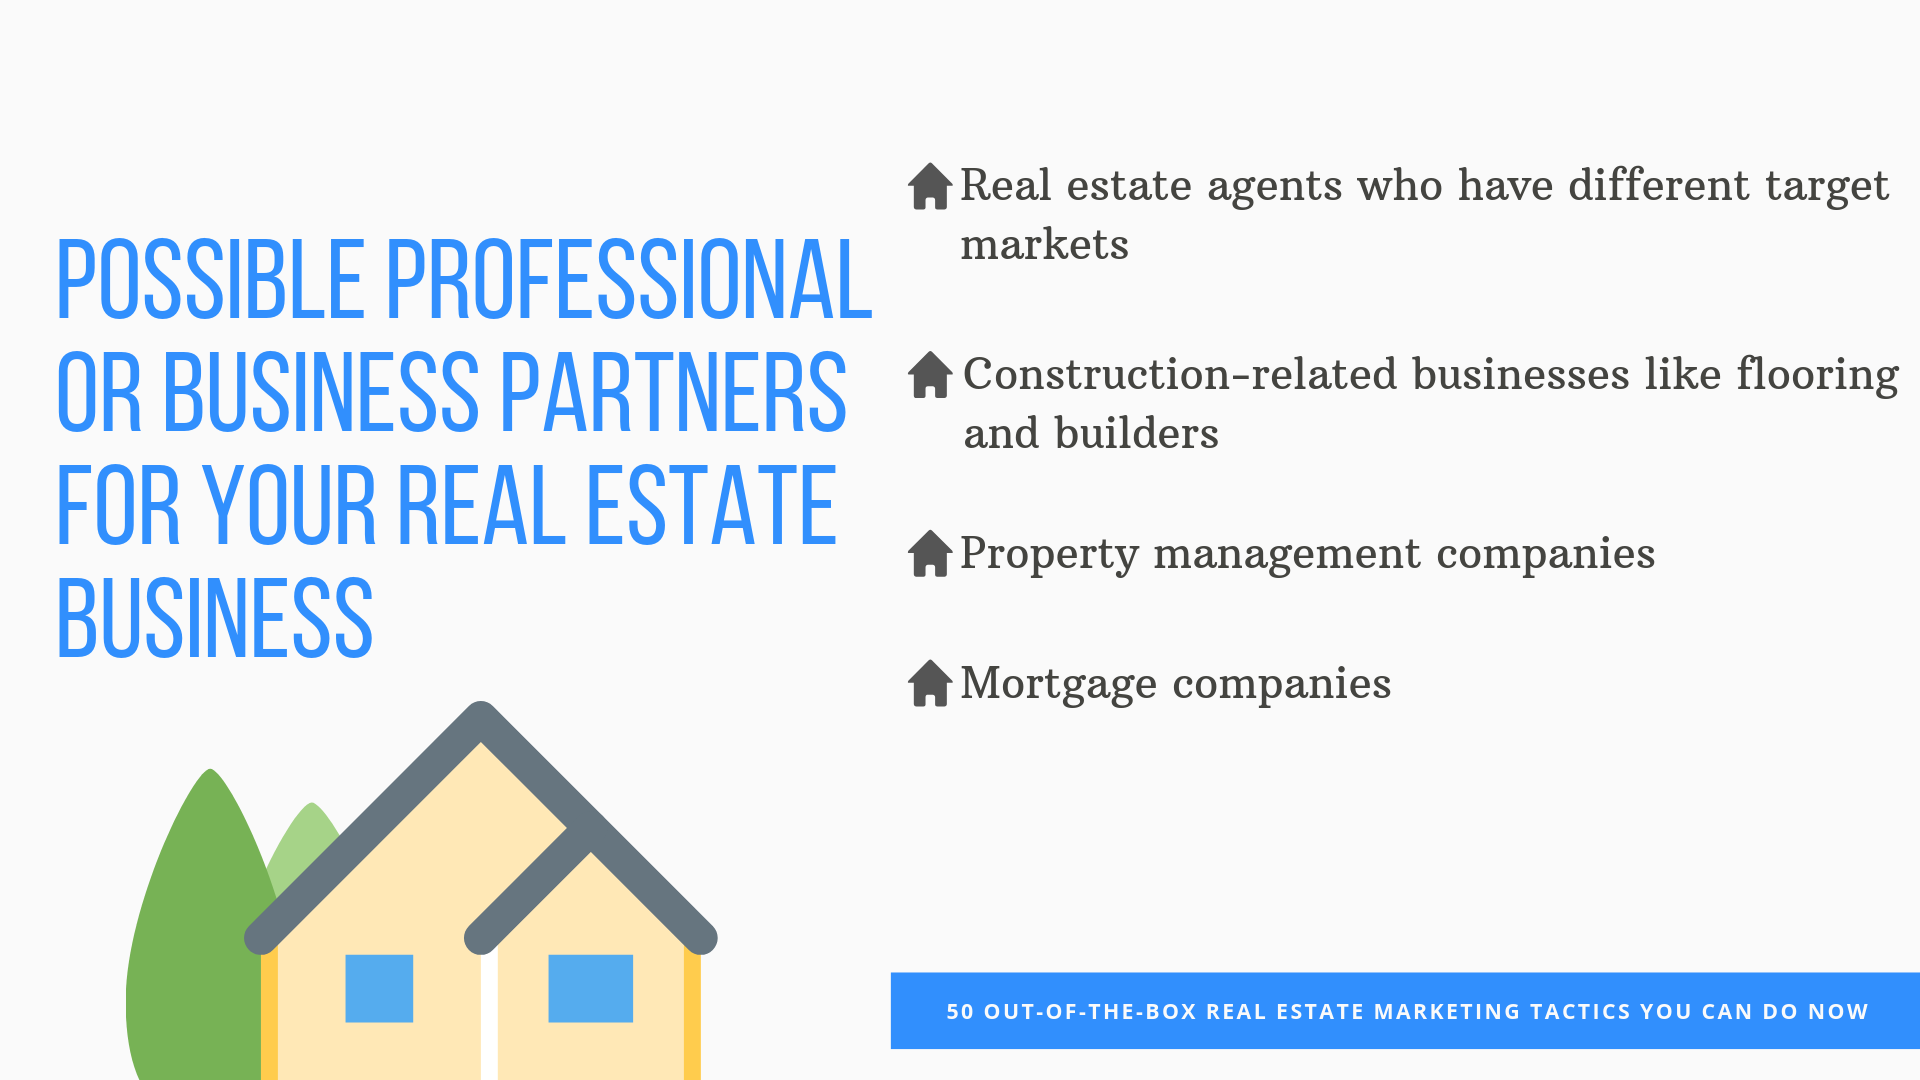 POSSIBLE PROFESSIONAL OR BUSINESS PARTNERS FOR YOUR REAL ESTATE BUSINESS